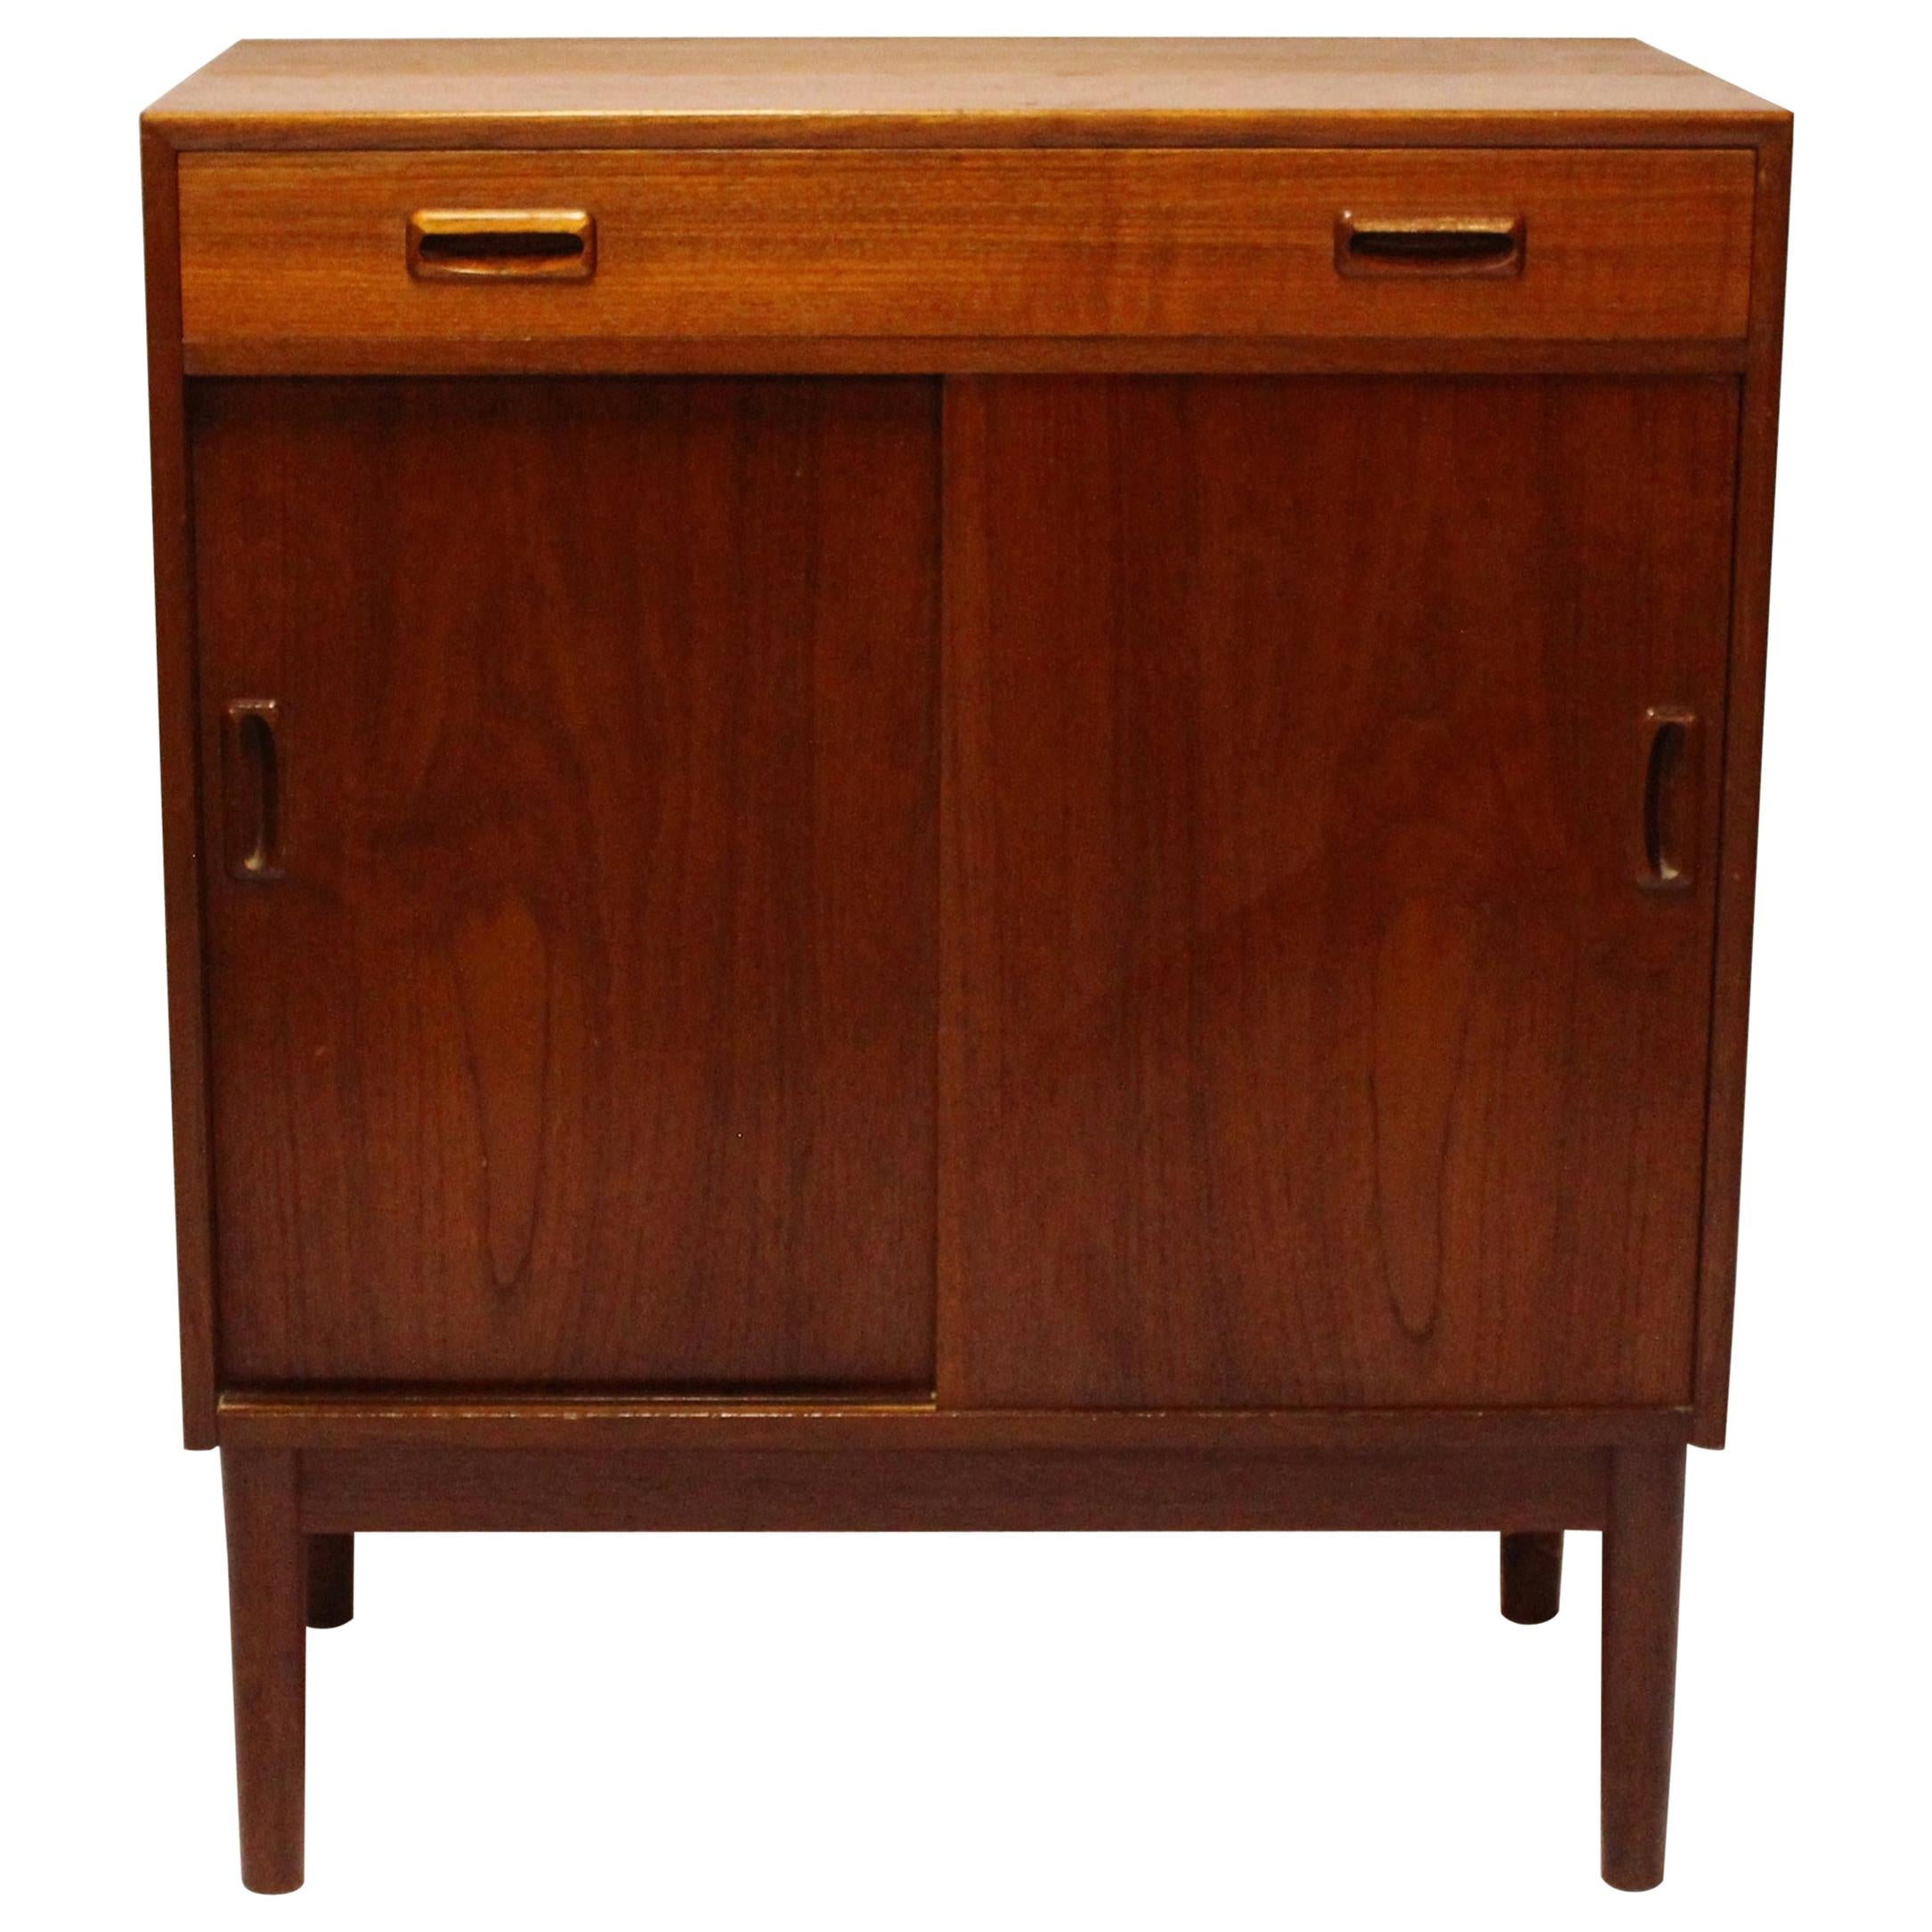 Sideboard with Sliding Doors in Teak of Danish Design from the 1960s